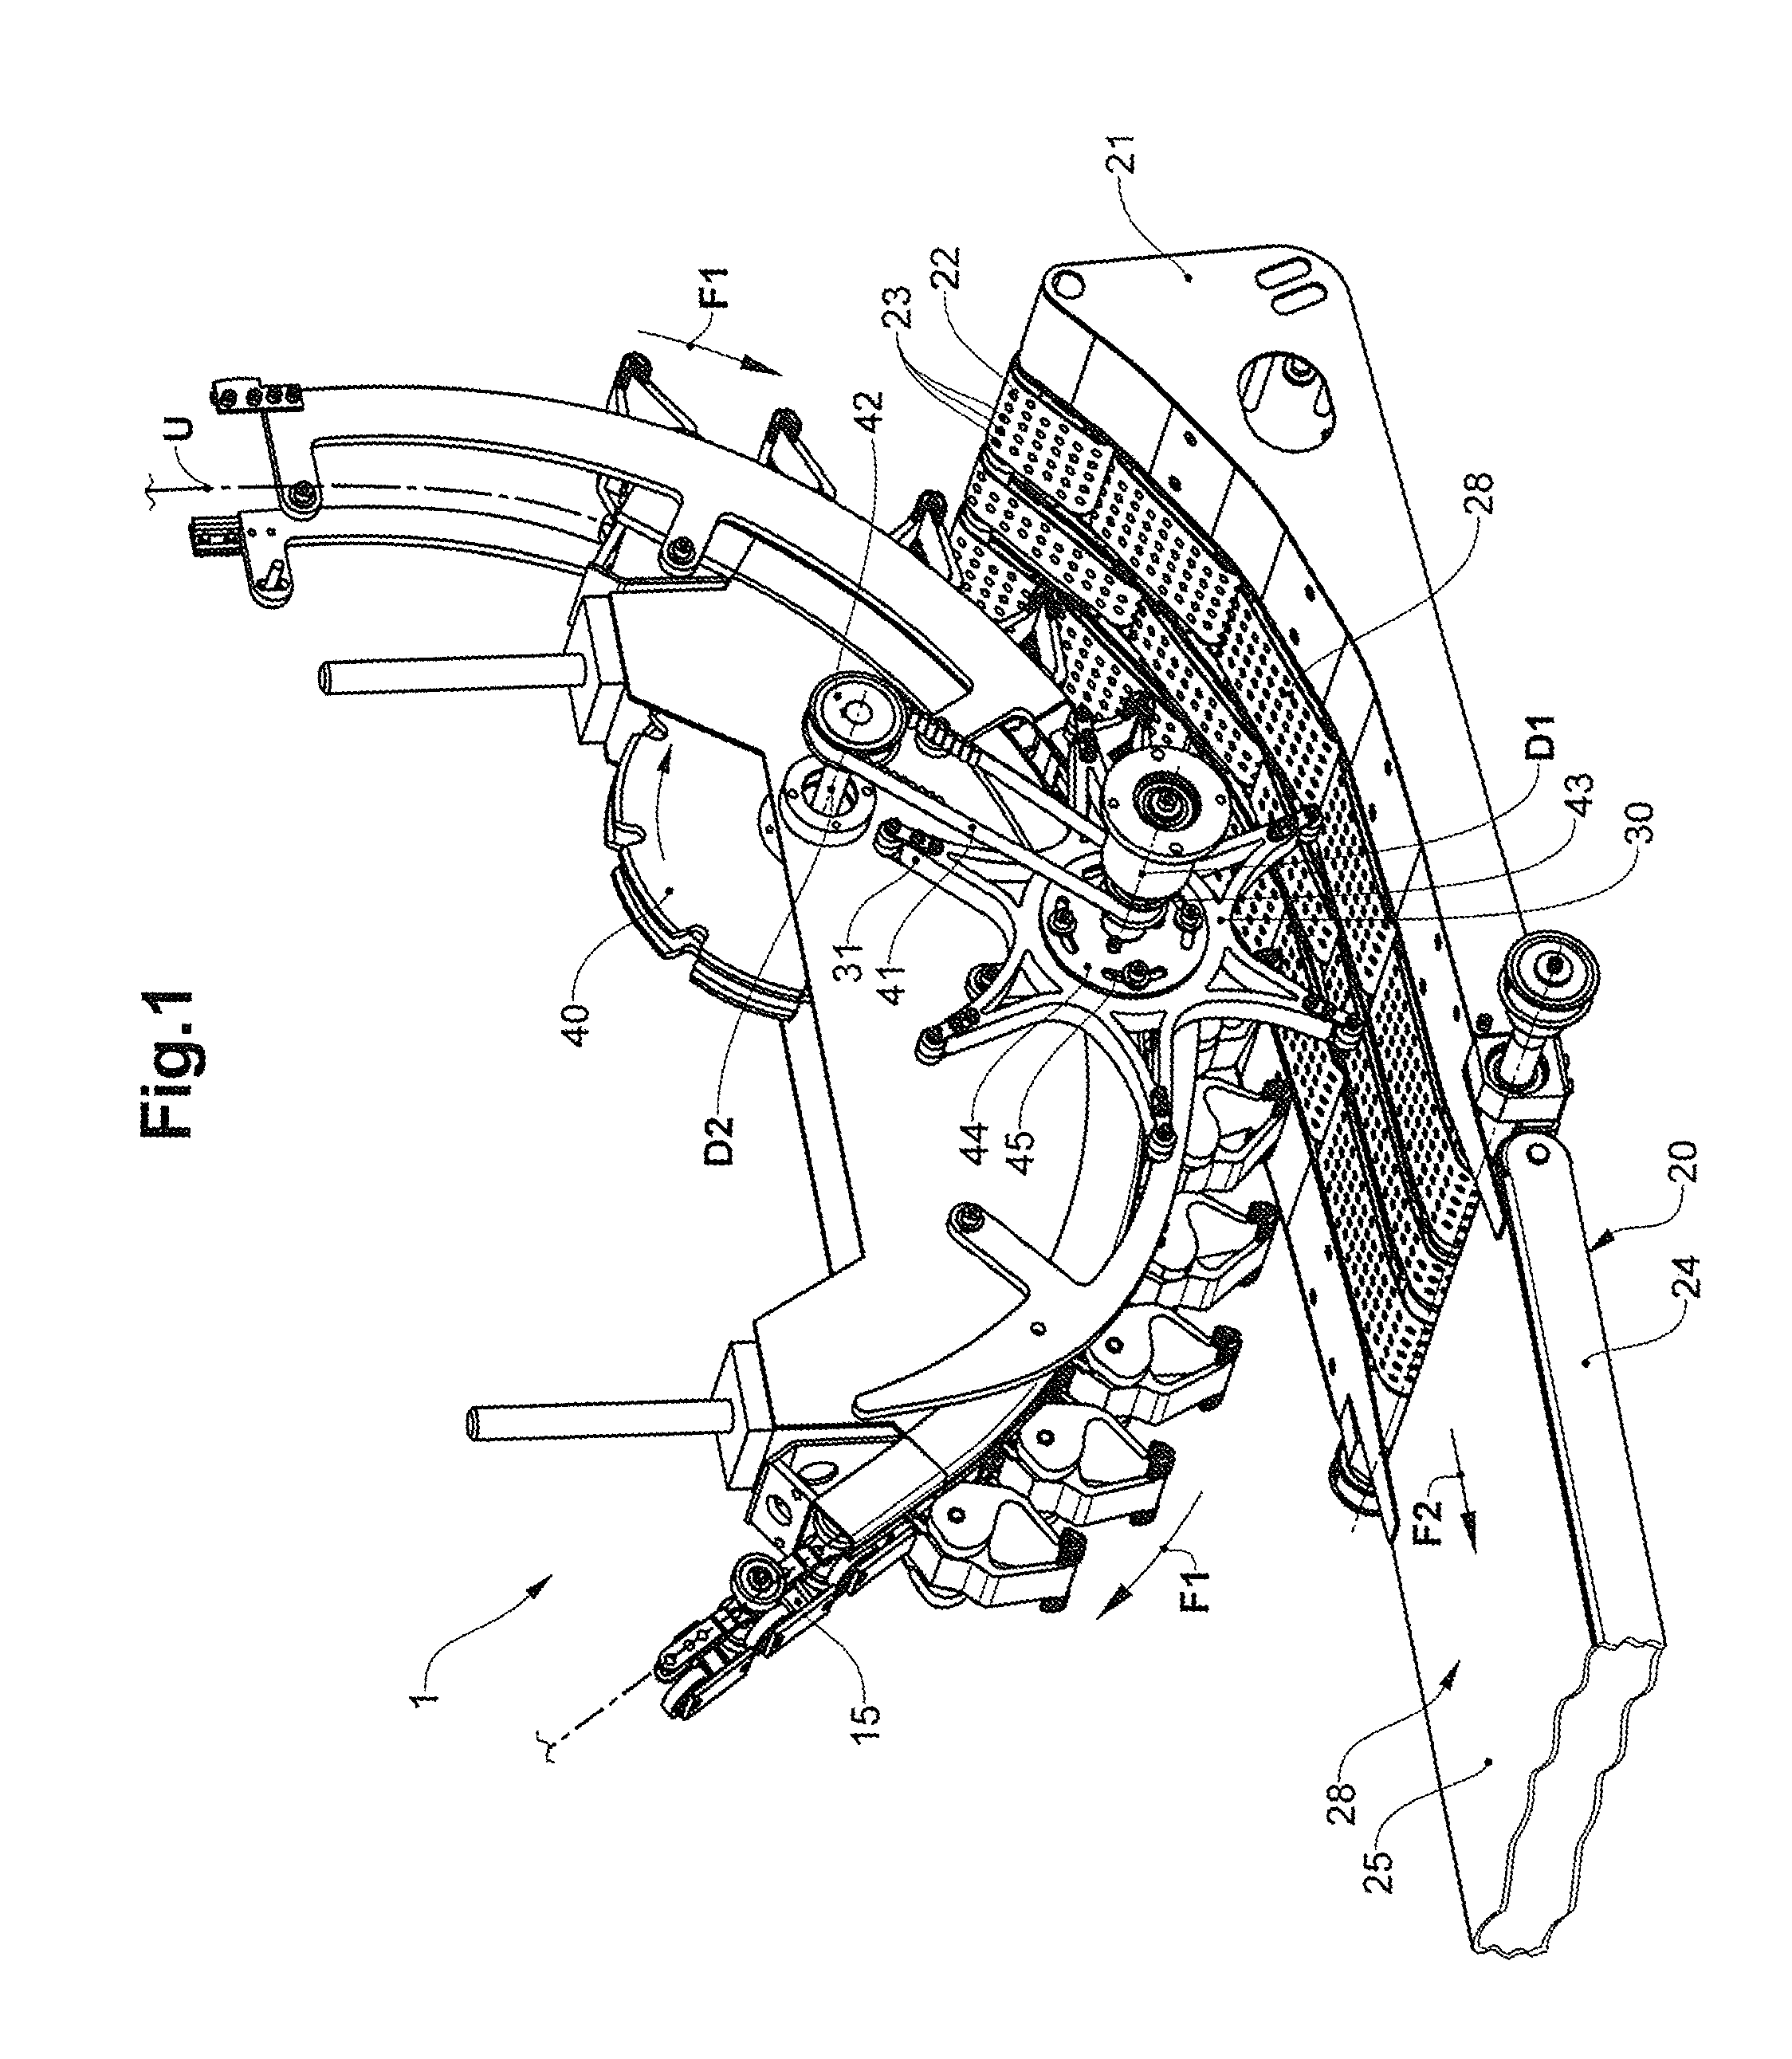 Device and method for conveying flat objects